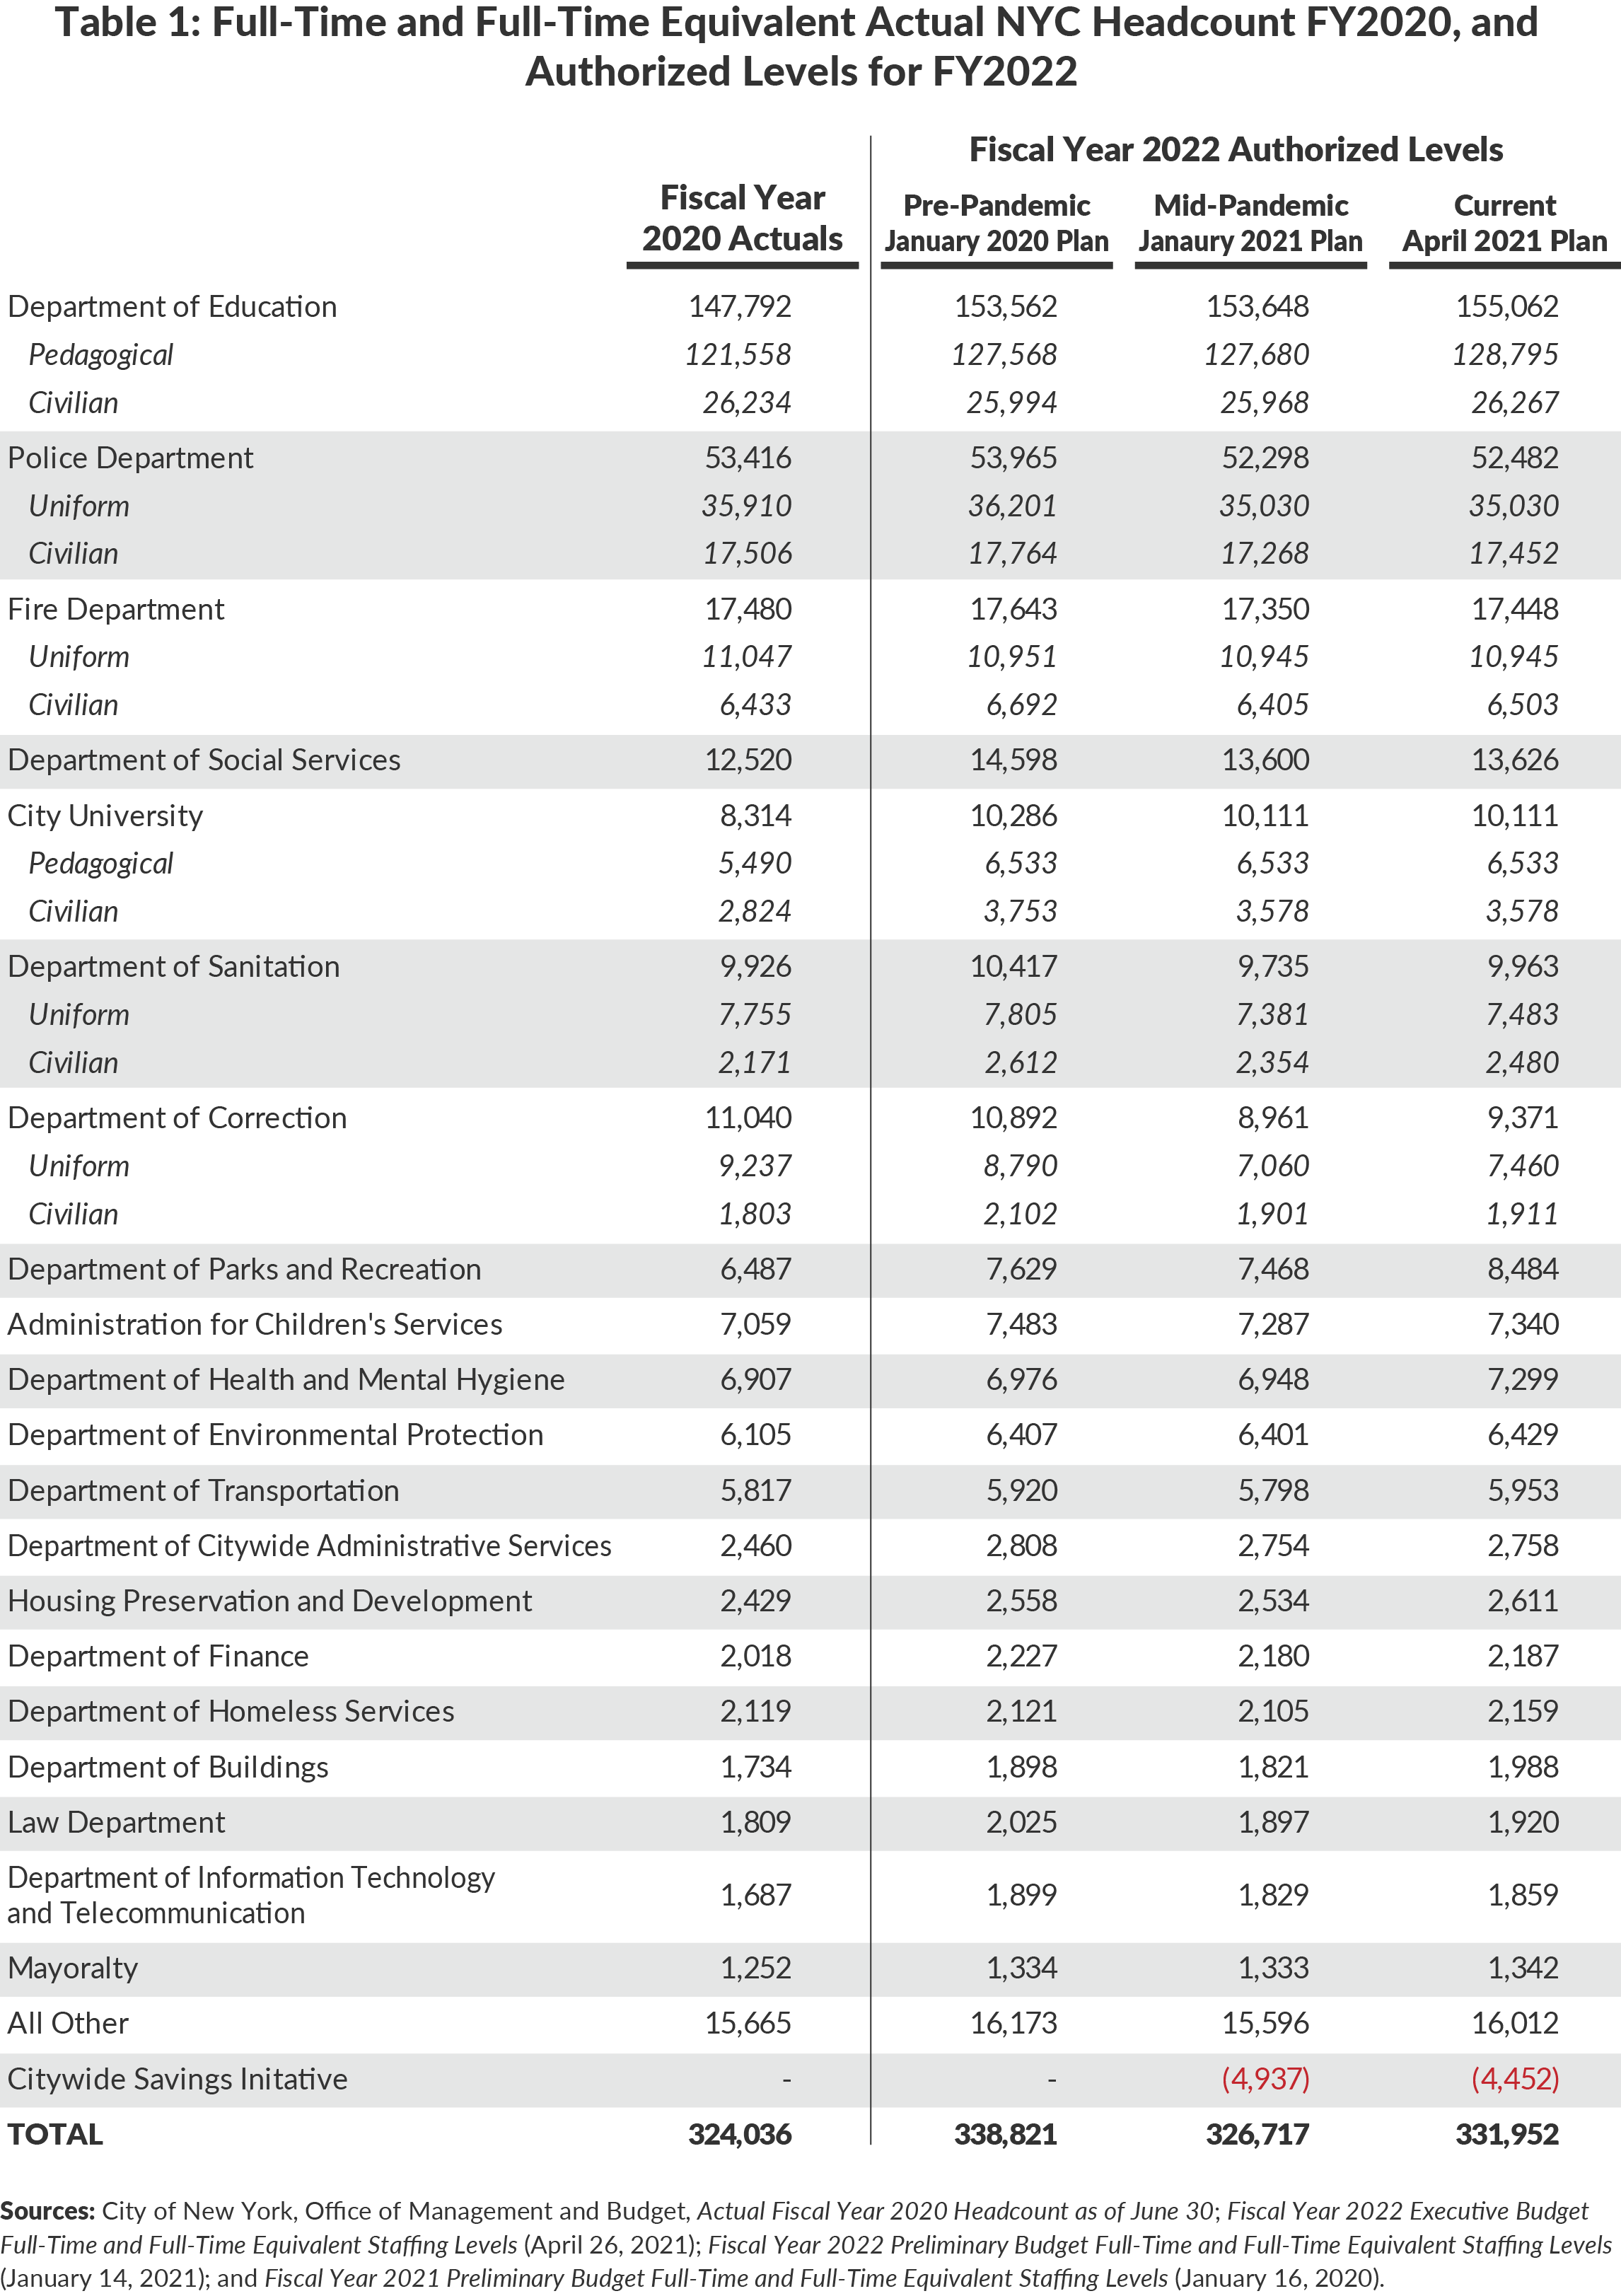 Table 1. Full-Time and Full-Time Equivalent Actual NYC Headcount FY2020, and Authorized Levels for FY2022